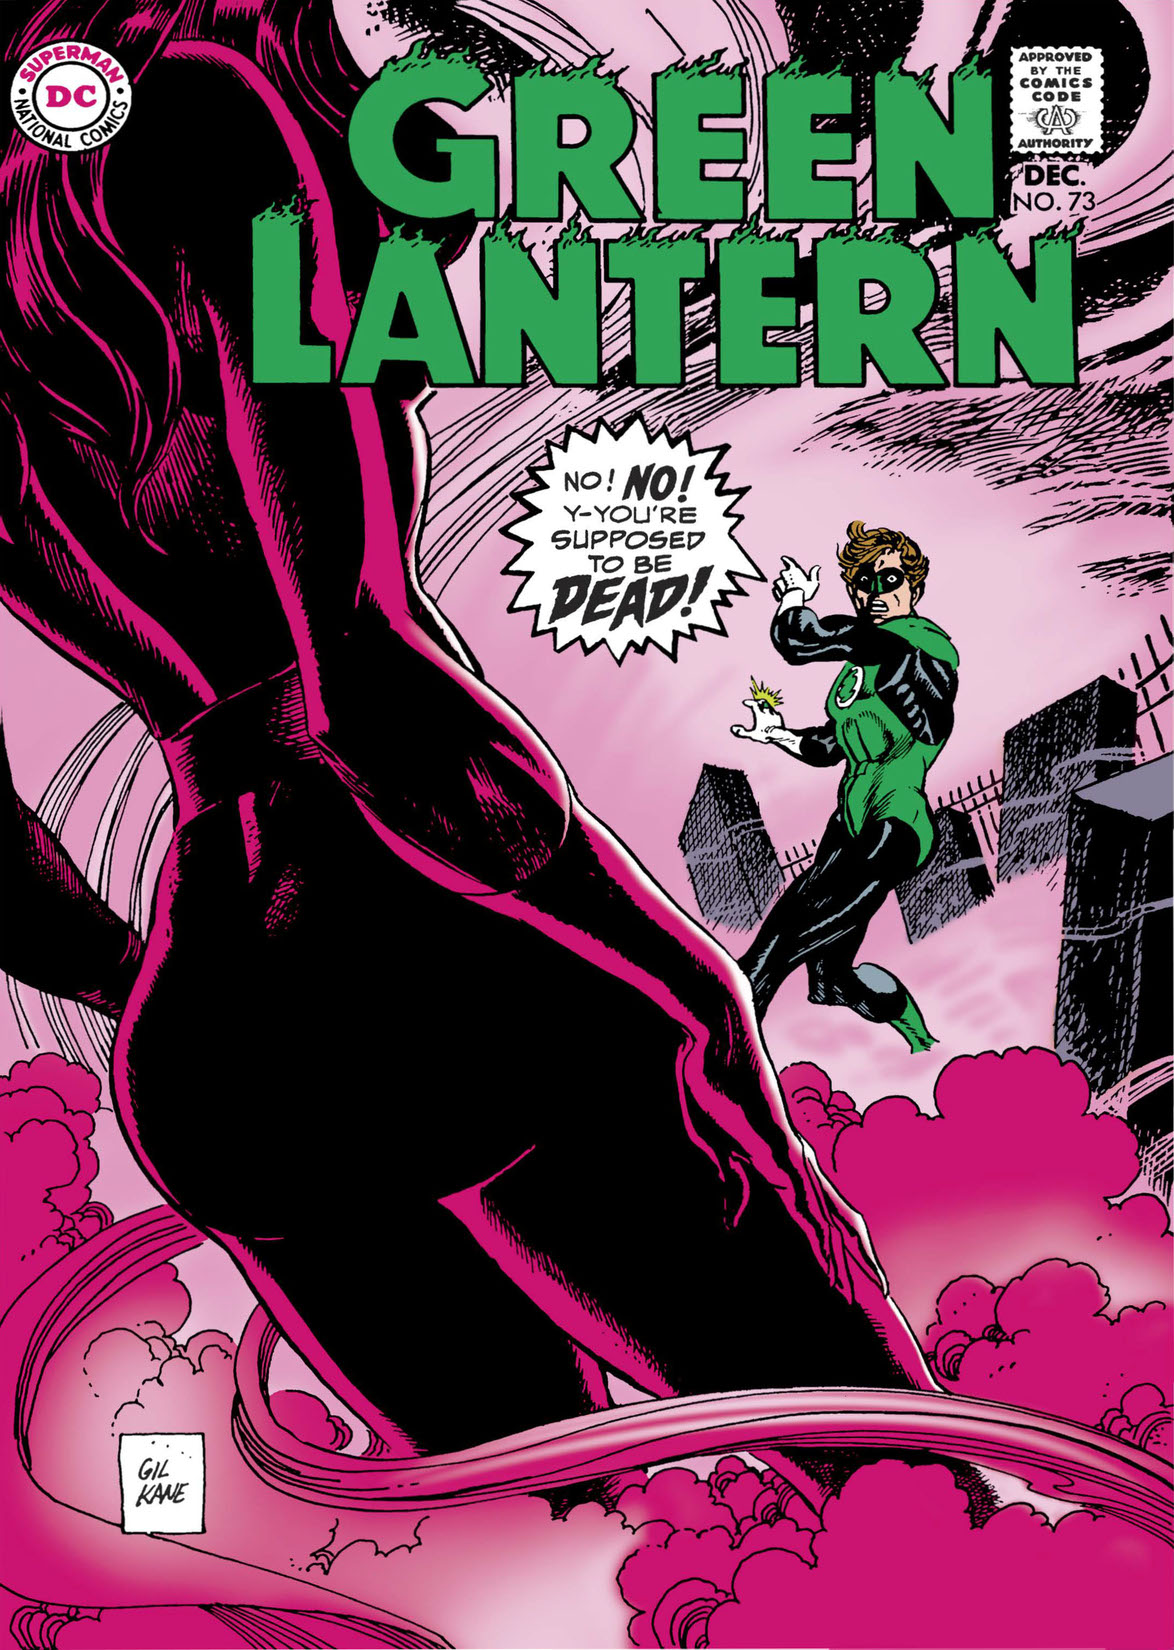 Green Lantern (1960-) #73 preview images